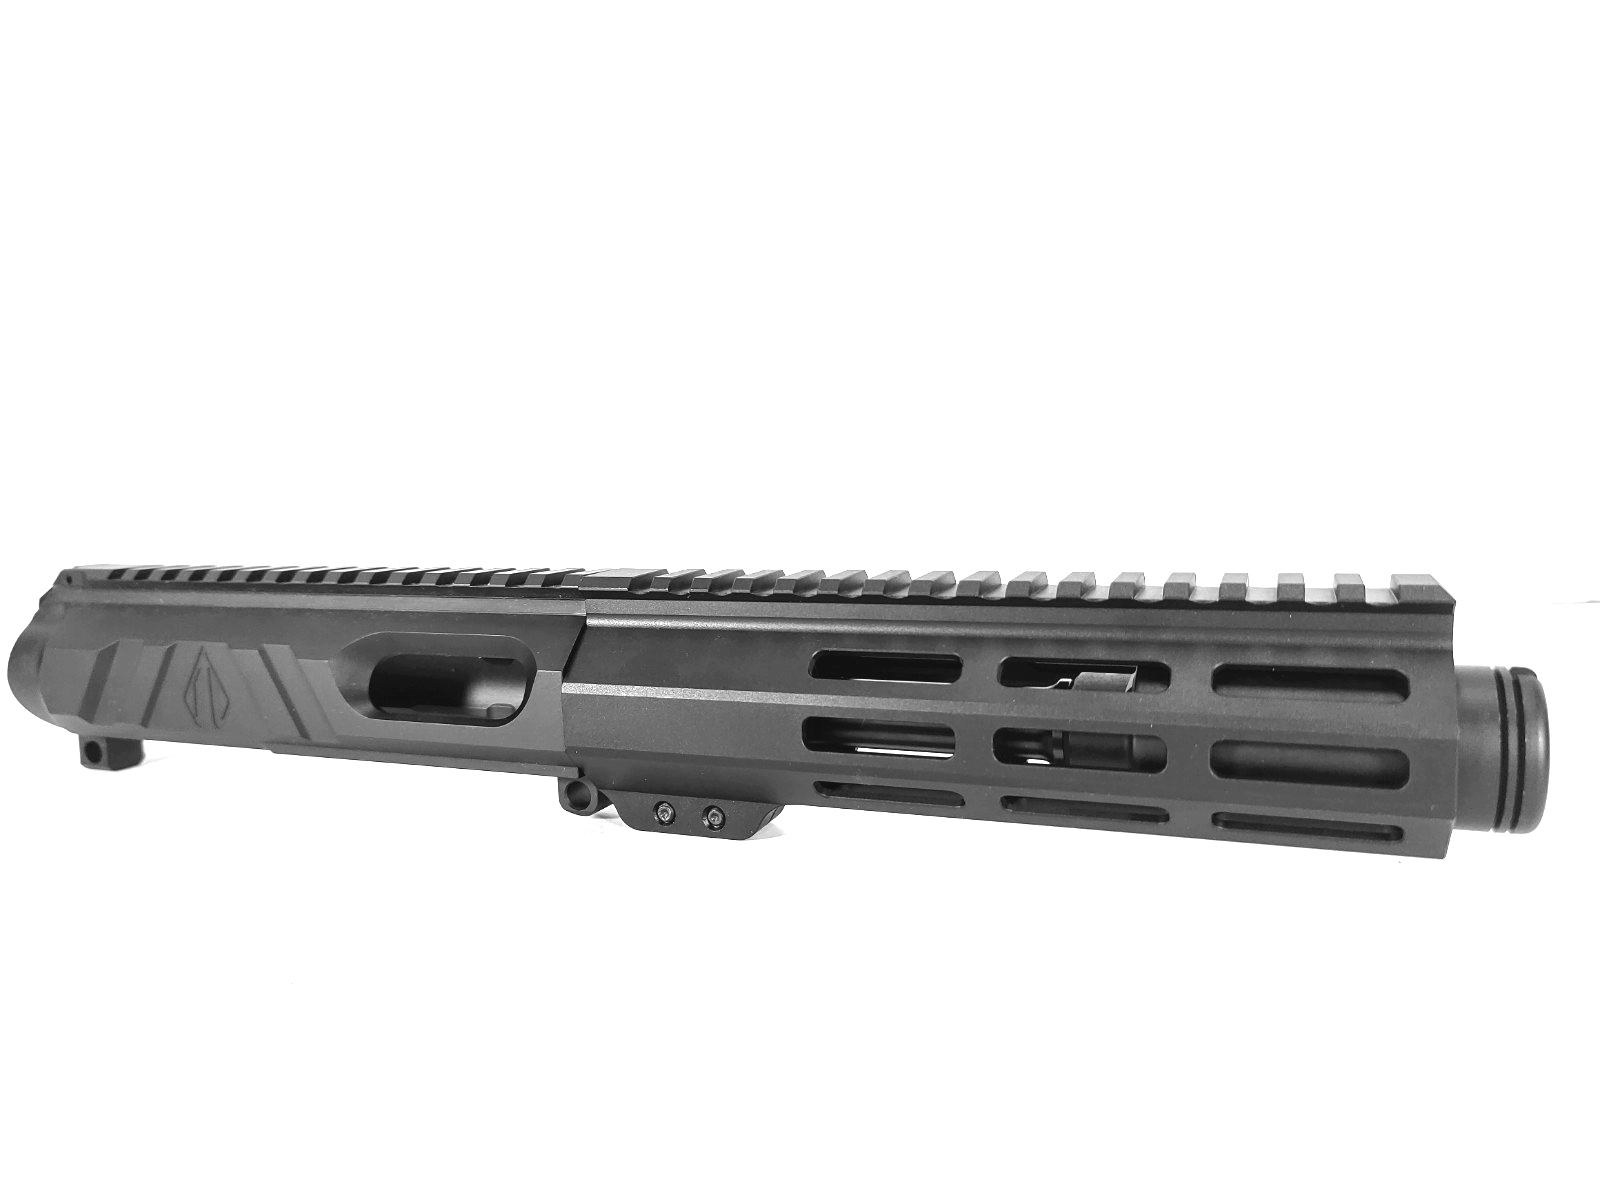 5.5 inch 40 S&W NR Side Charging PCC Upper USA MADE